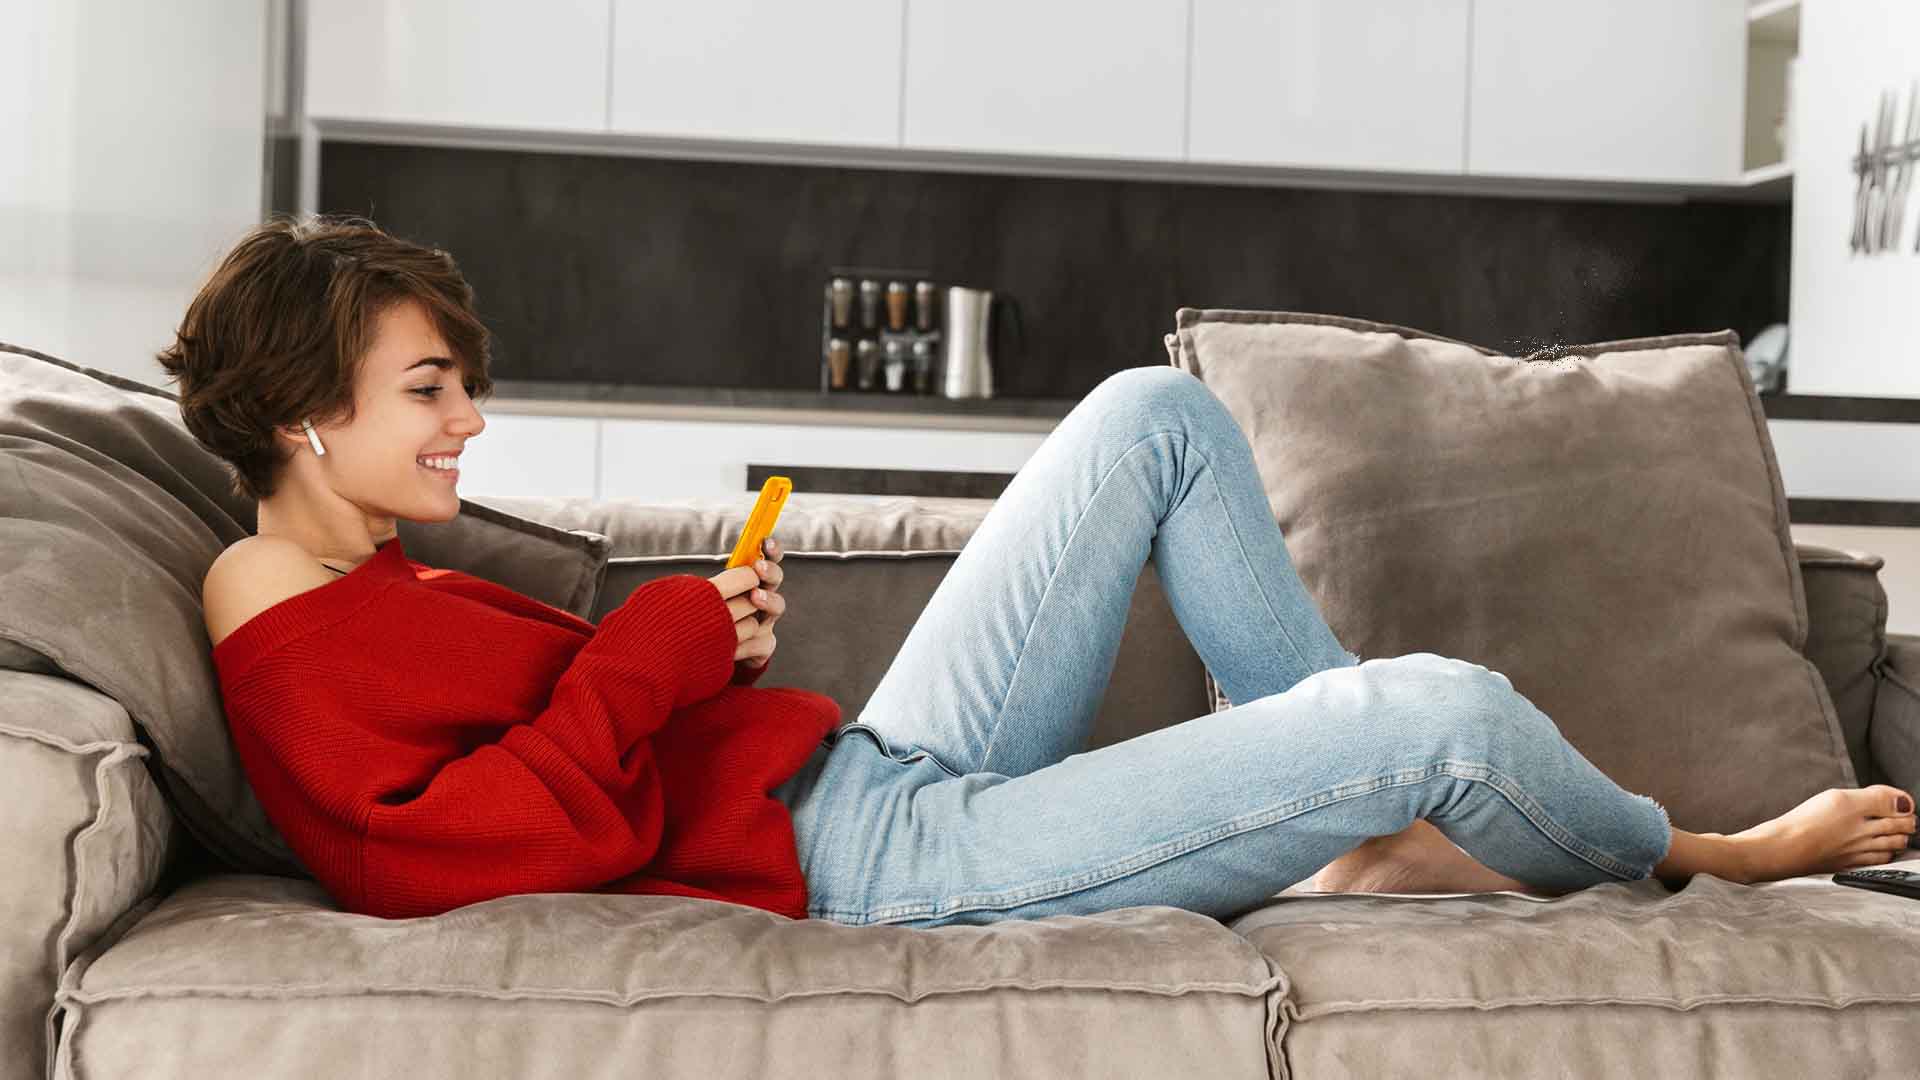 Girl on Sofa Looking at mobile phone